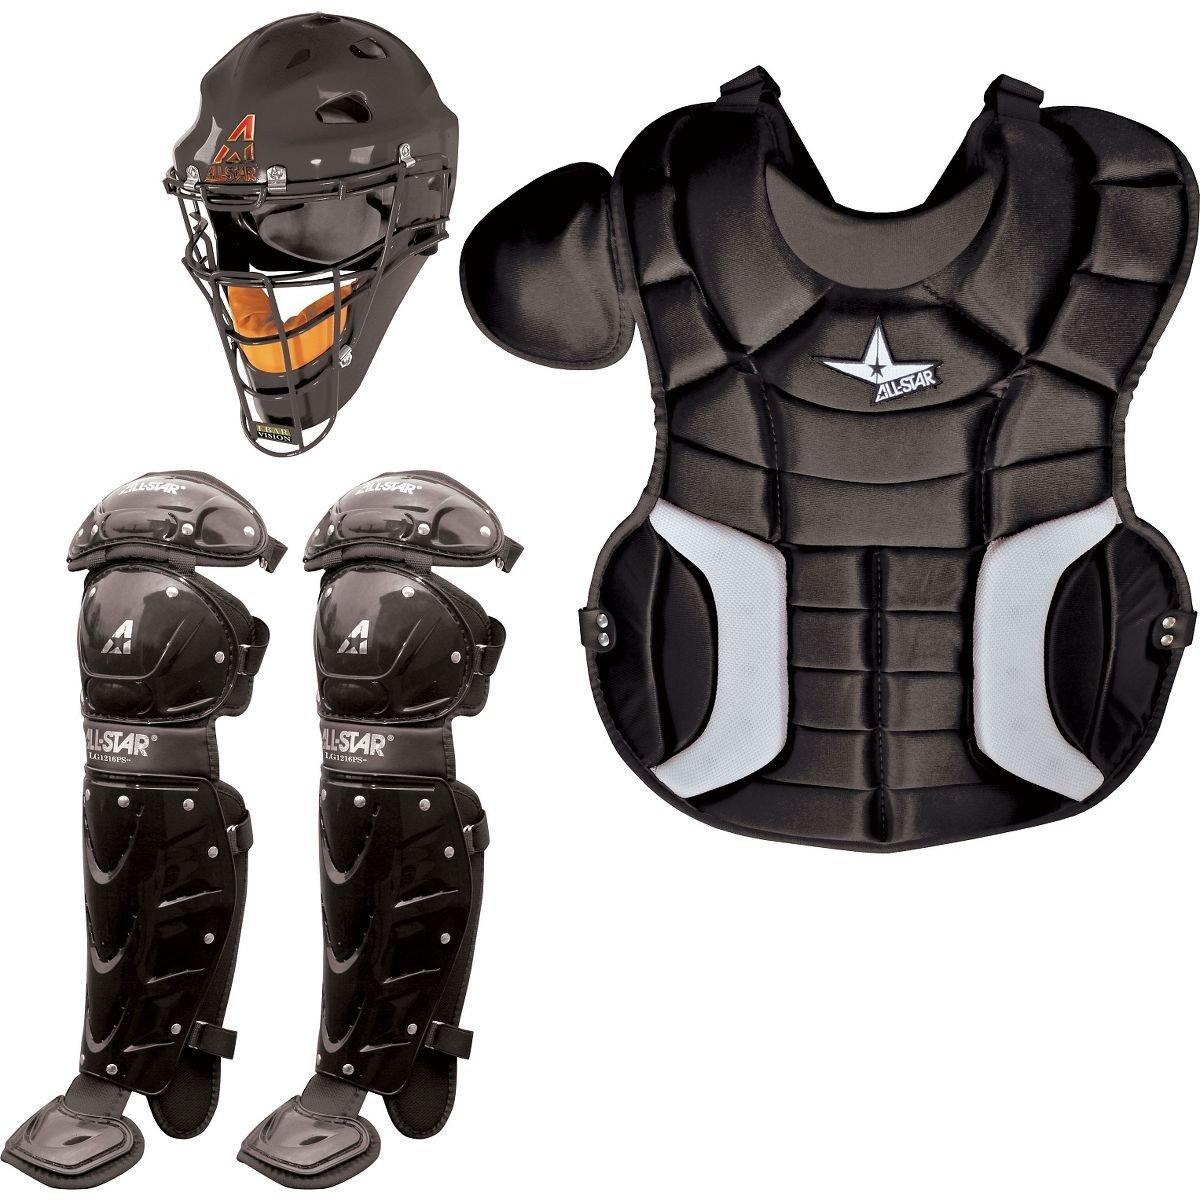 All Star Players Series Youth 10-12 Catchers Gear Set Red Black